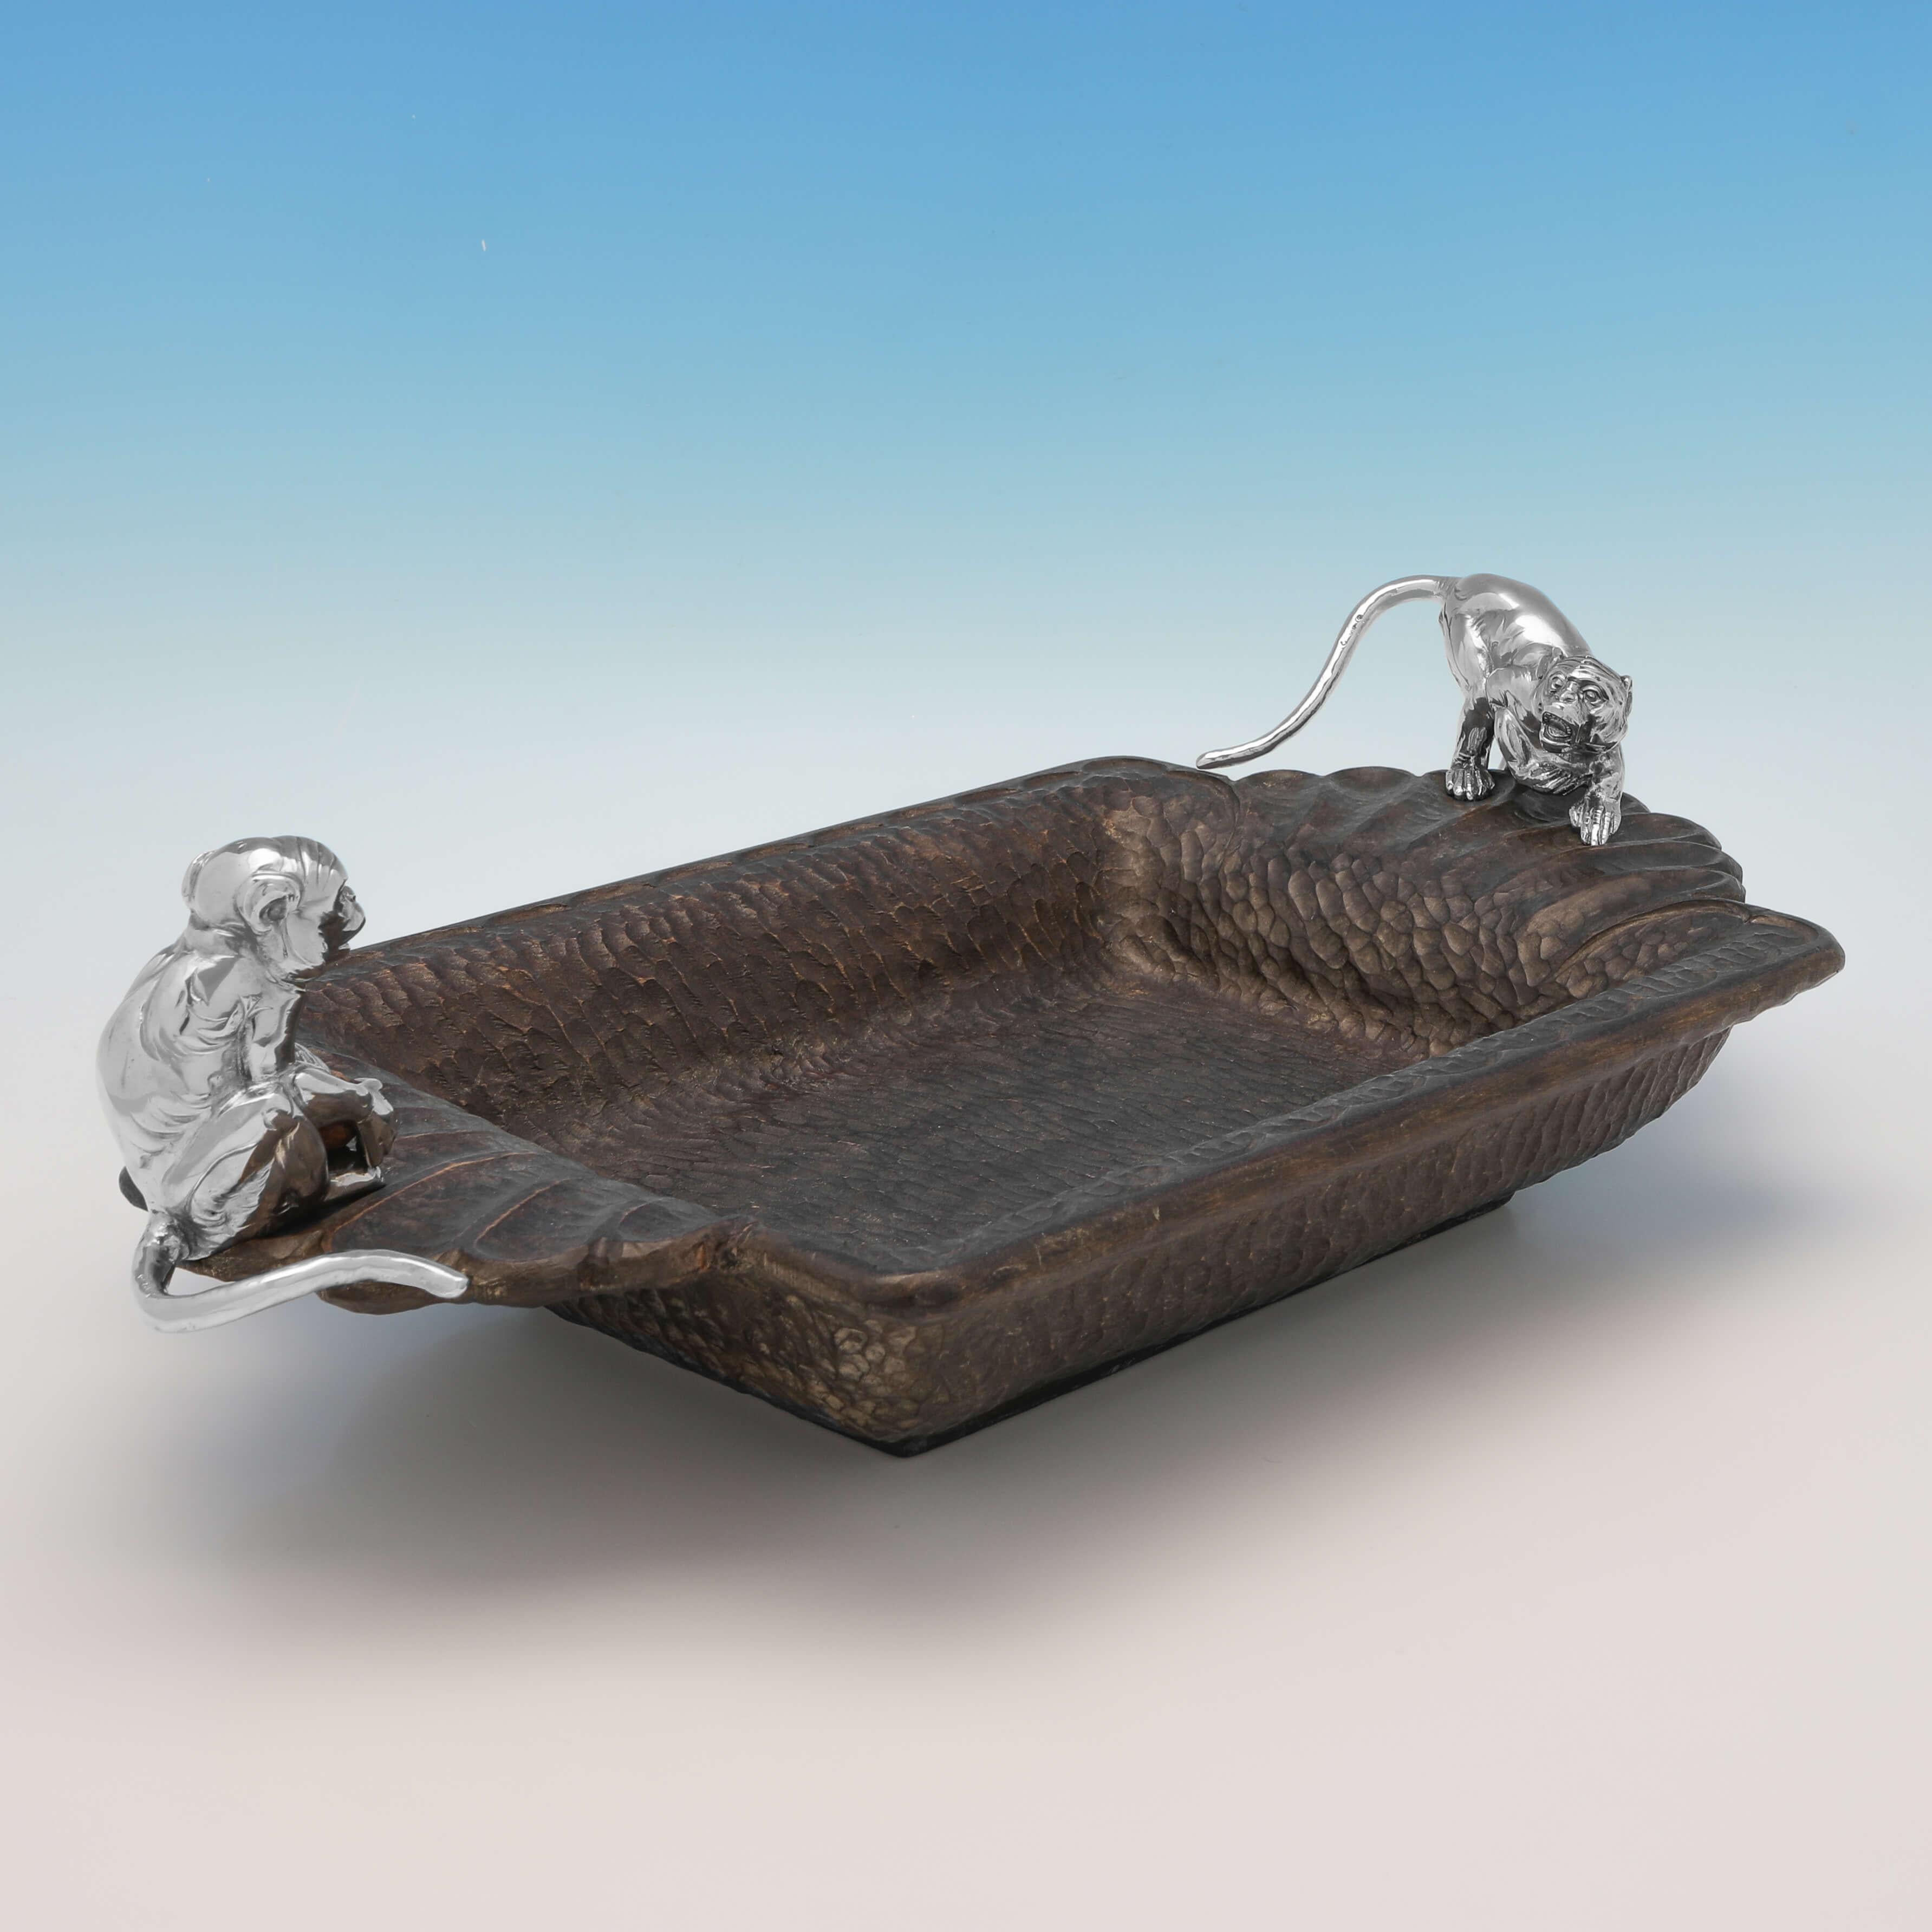 Made circa 1900 by J.D. Schleissner & Sohne, this striking Antique 800 Standard German Silver Nut Dish, features 2 silver models of monkeys to either side, with the body made out of a nut wood. 

The nut dish measures 5